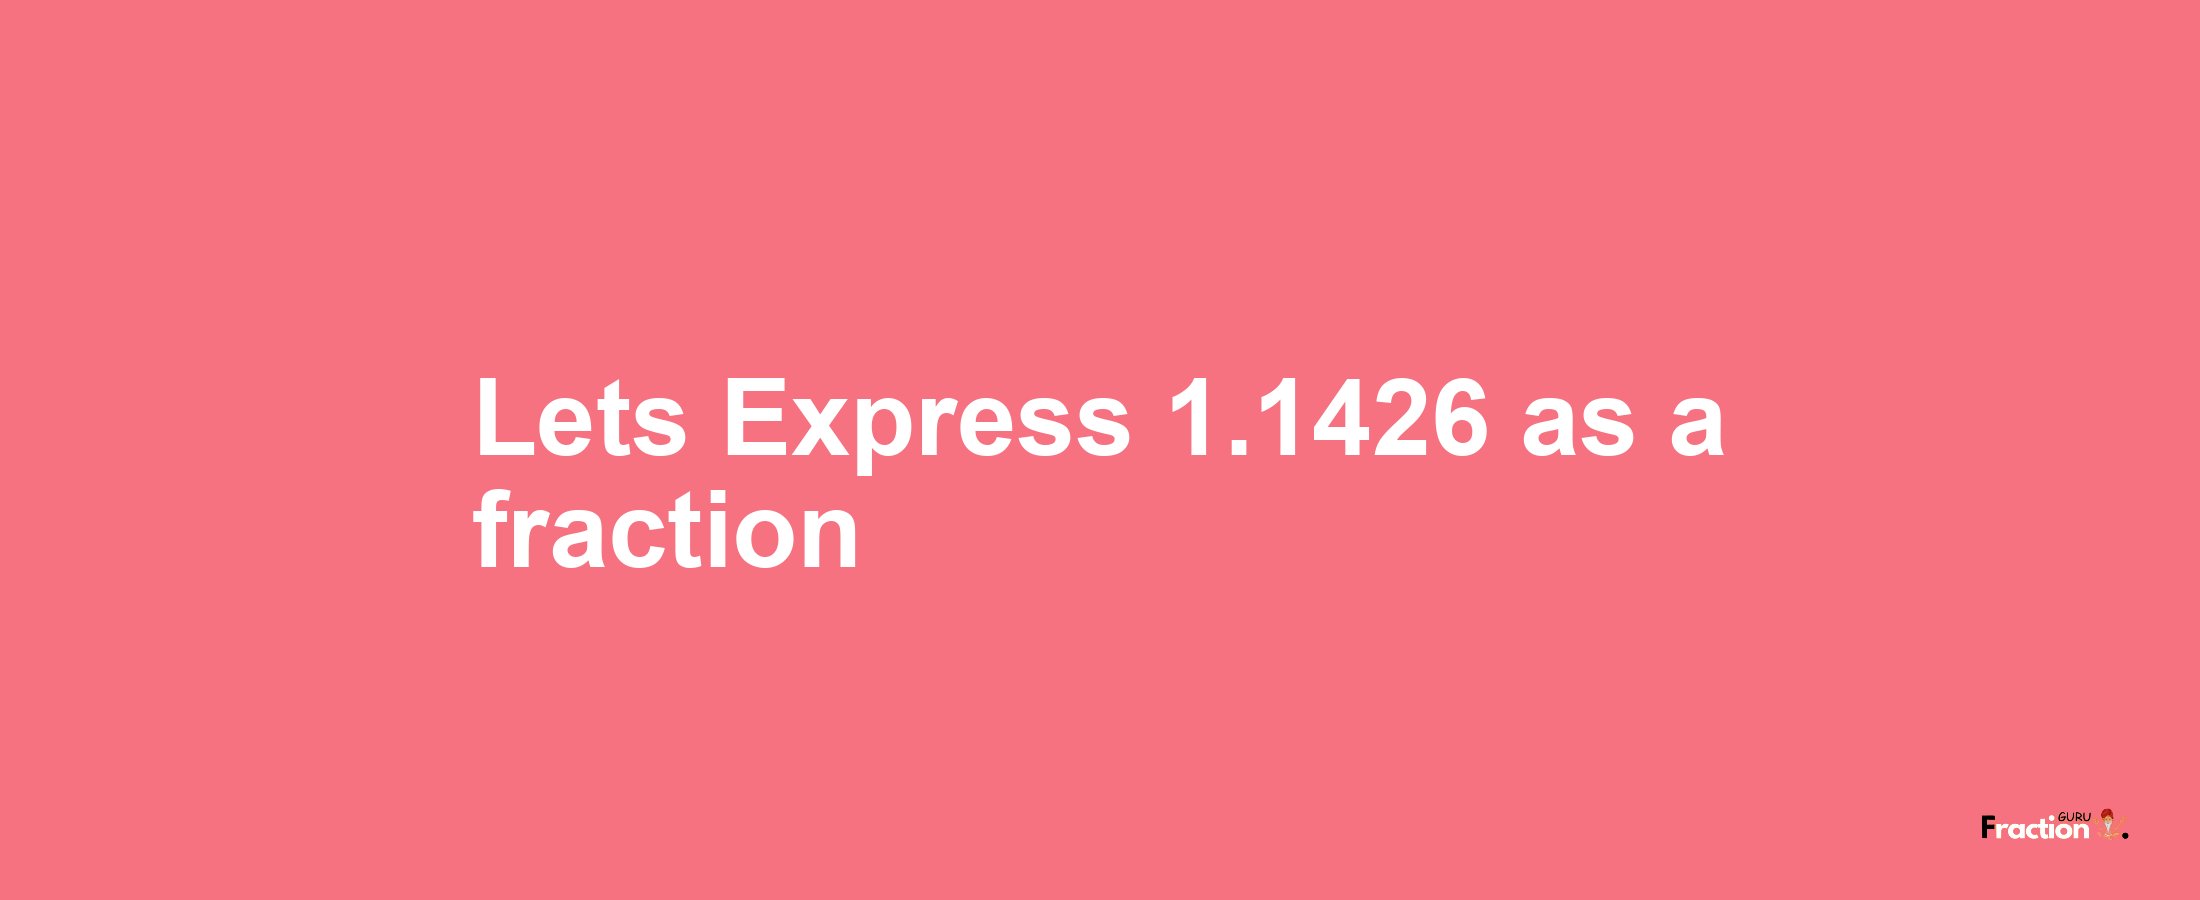 Lets Express 1.1426 as afraction